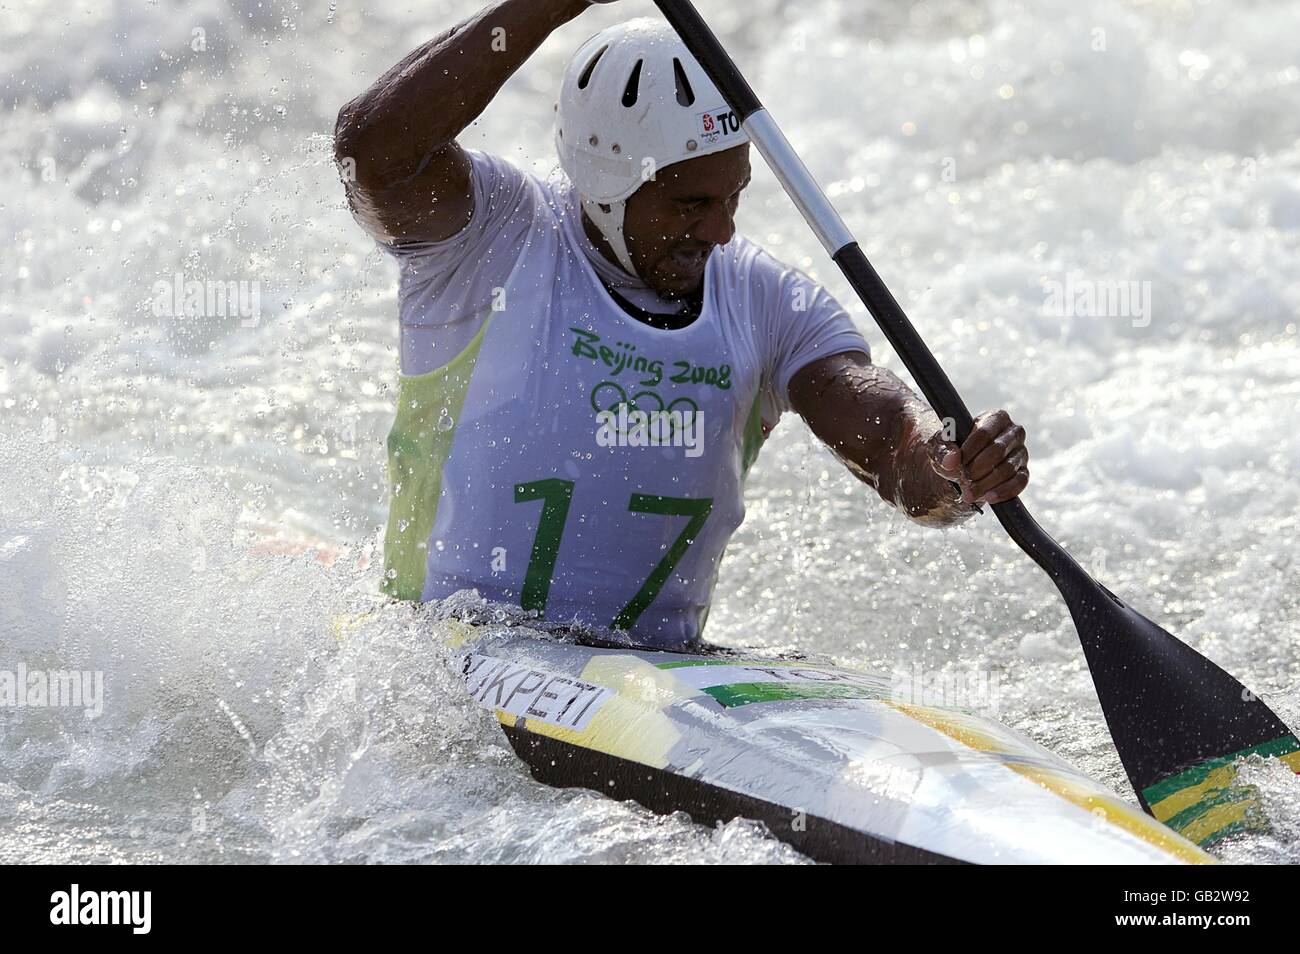 Togo's Benjamin Boukpeti during the kayak (K1) men's semifinal at the Rowing-Canoeing Park in Beijing, China during the 2008 Beijing Olympic Games. Boukpeiti went on to win the bronze medal in this event, Togo's first ever olympic medal. Stock Photo